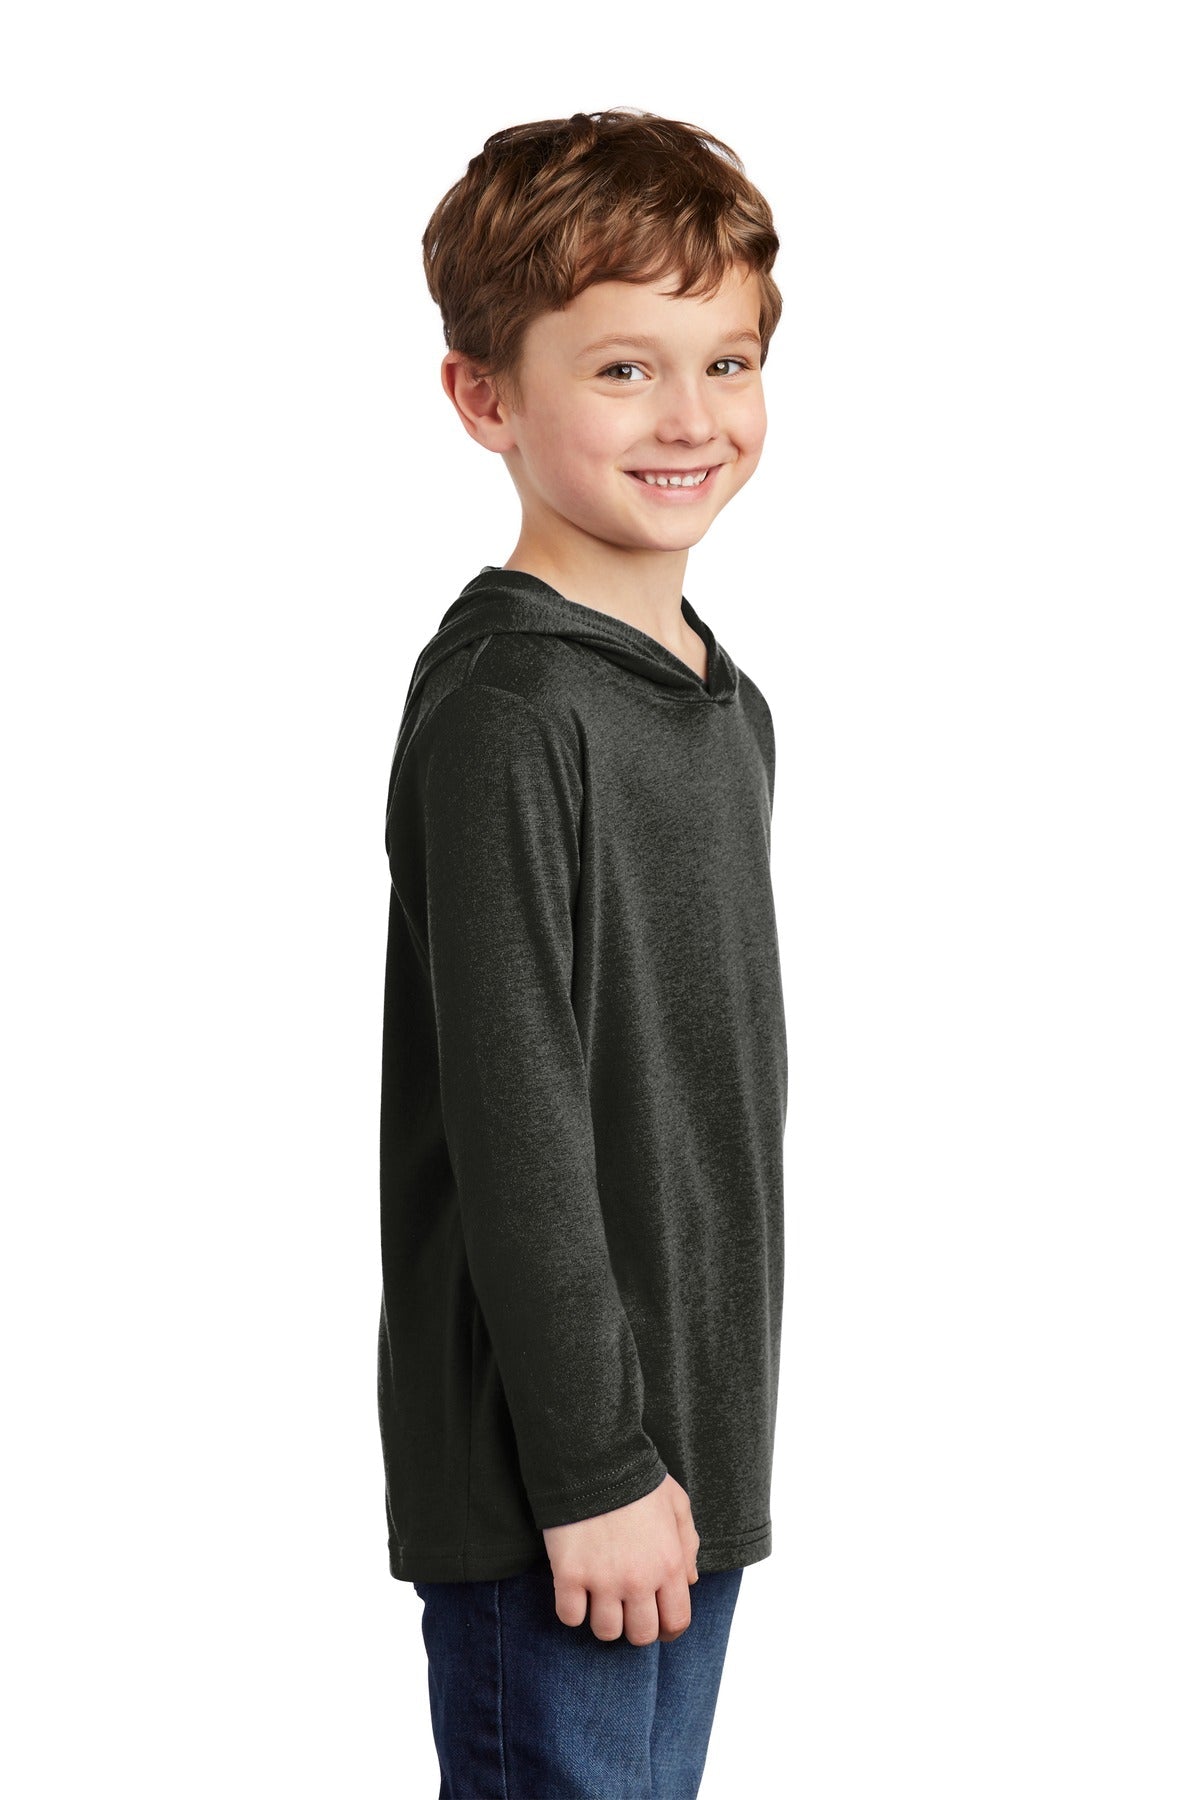 District ® Youth Perfect Tri ® Long Sleeve Hoodie DT139Y - DFW Impression